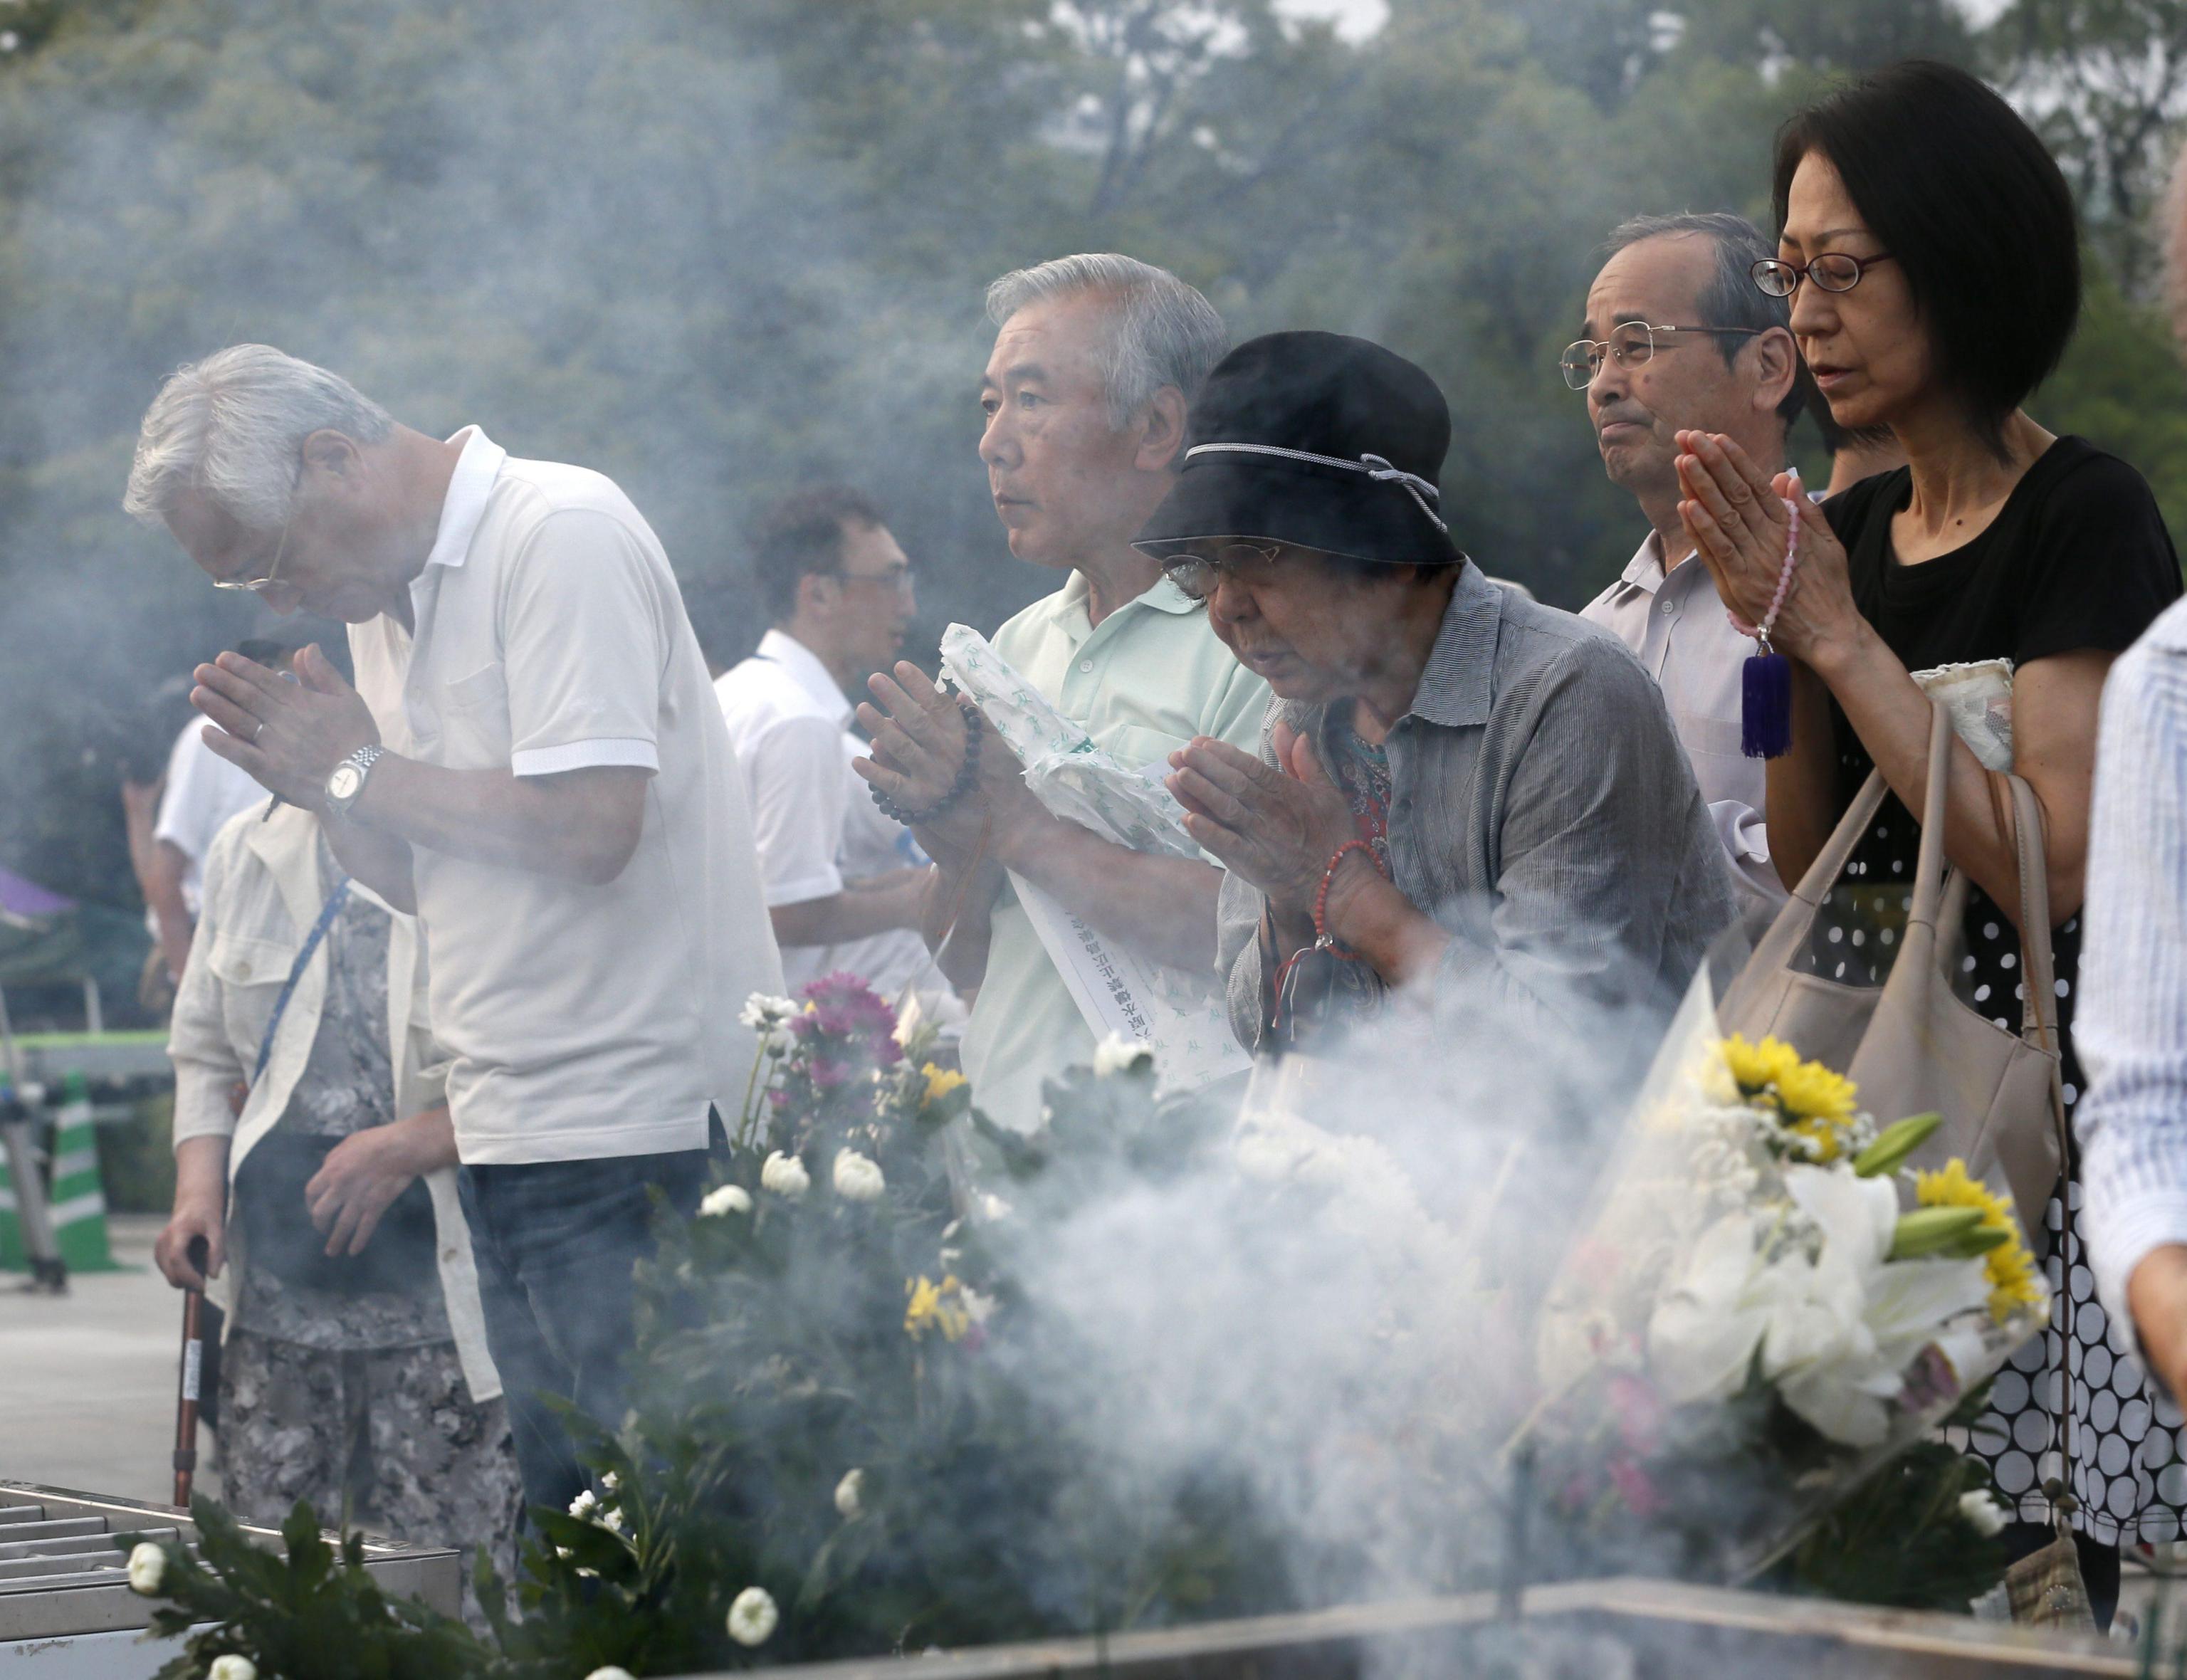 epa03814169 Residents offer a prayer for atomic bomb victims at the Hiroshima Peace Memorial Park in Hiroshima, western Japan, 06 August 2013 prior to the Peace Memorial Ceremony marking the 68th anniversary of the world's first atomic bombing of a city in 1945.  EPA/KIMIMASA MAYAMA